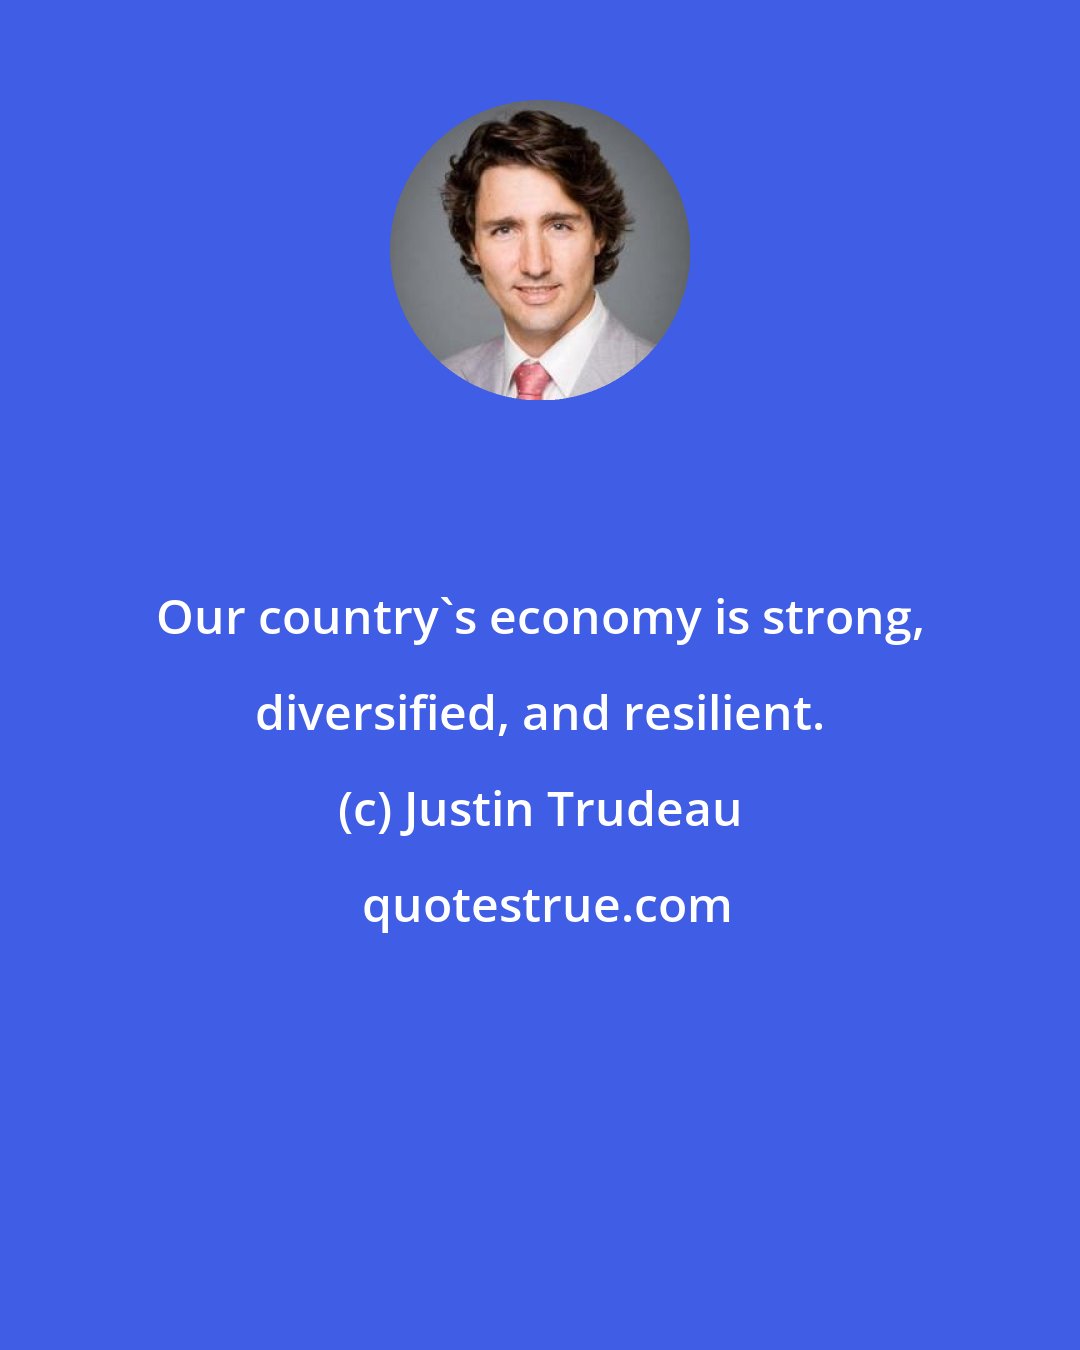 Justin Trudeau: Our country's economy is strong, diversified, and resilient.